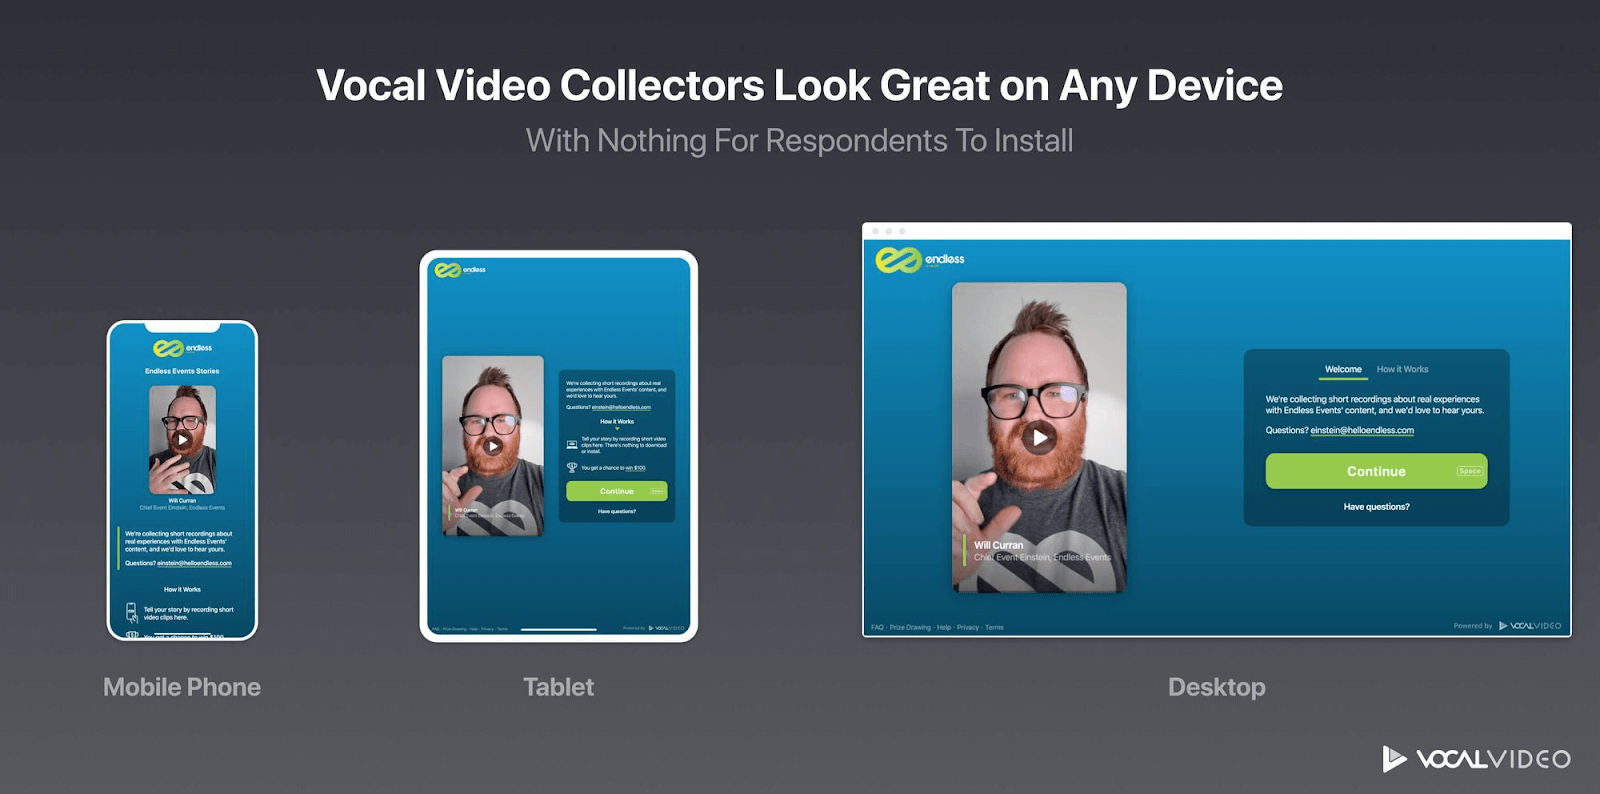 Vocal Video Collectors Look Great on Any Device with Nothing for Respondents to Install